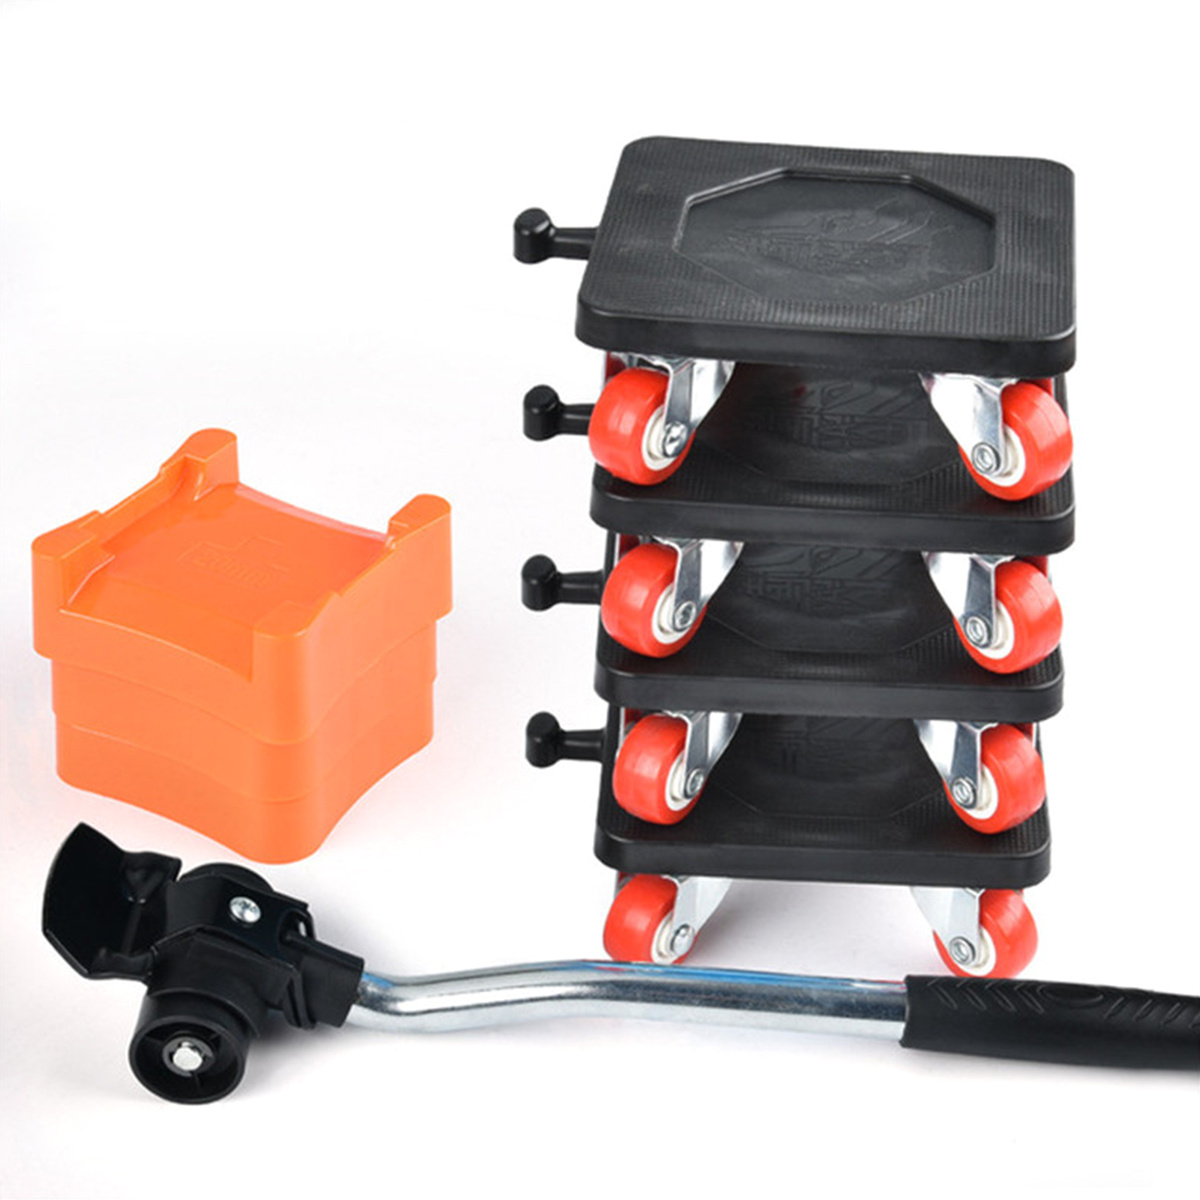 Move Heavy Duty Furniture Lifter, 4 Sliders Moving Wheels Set